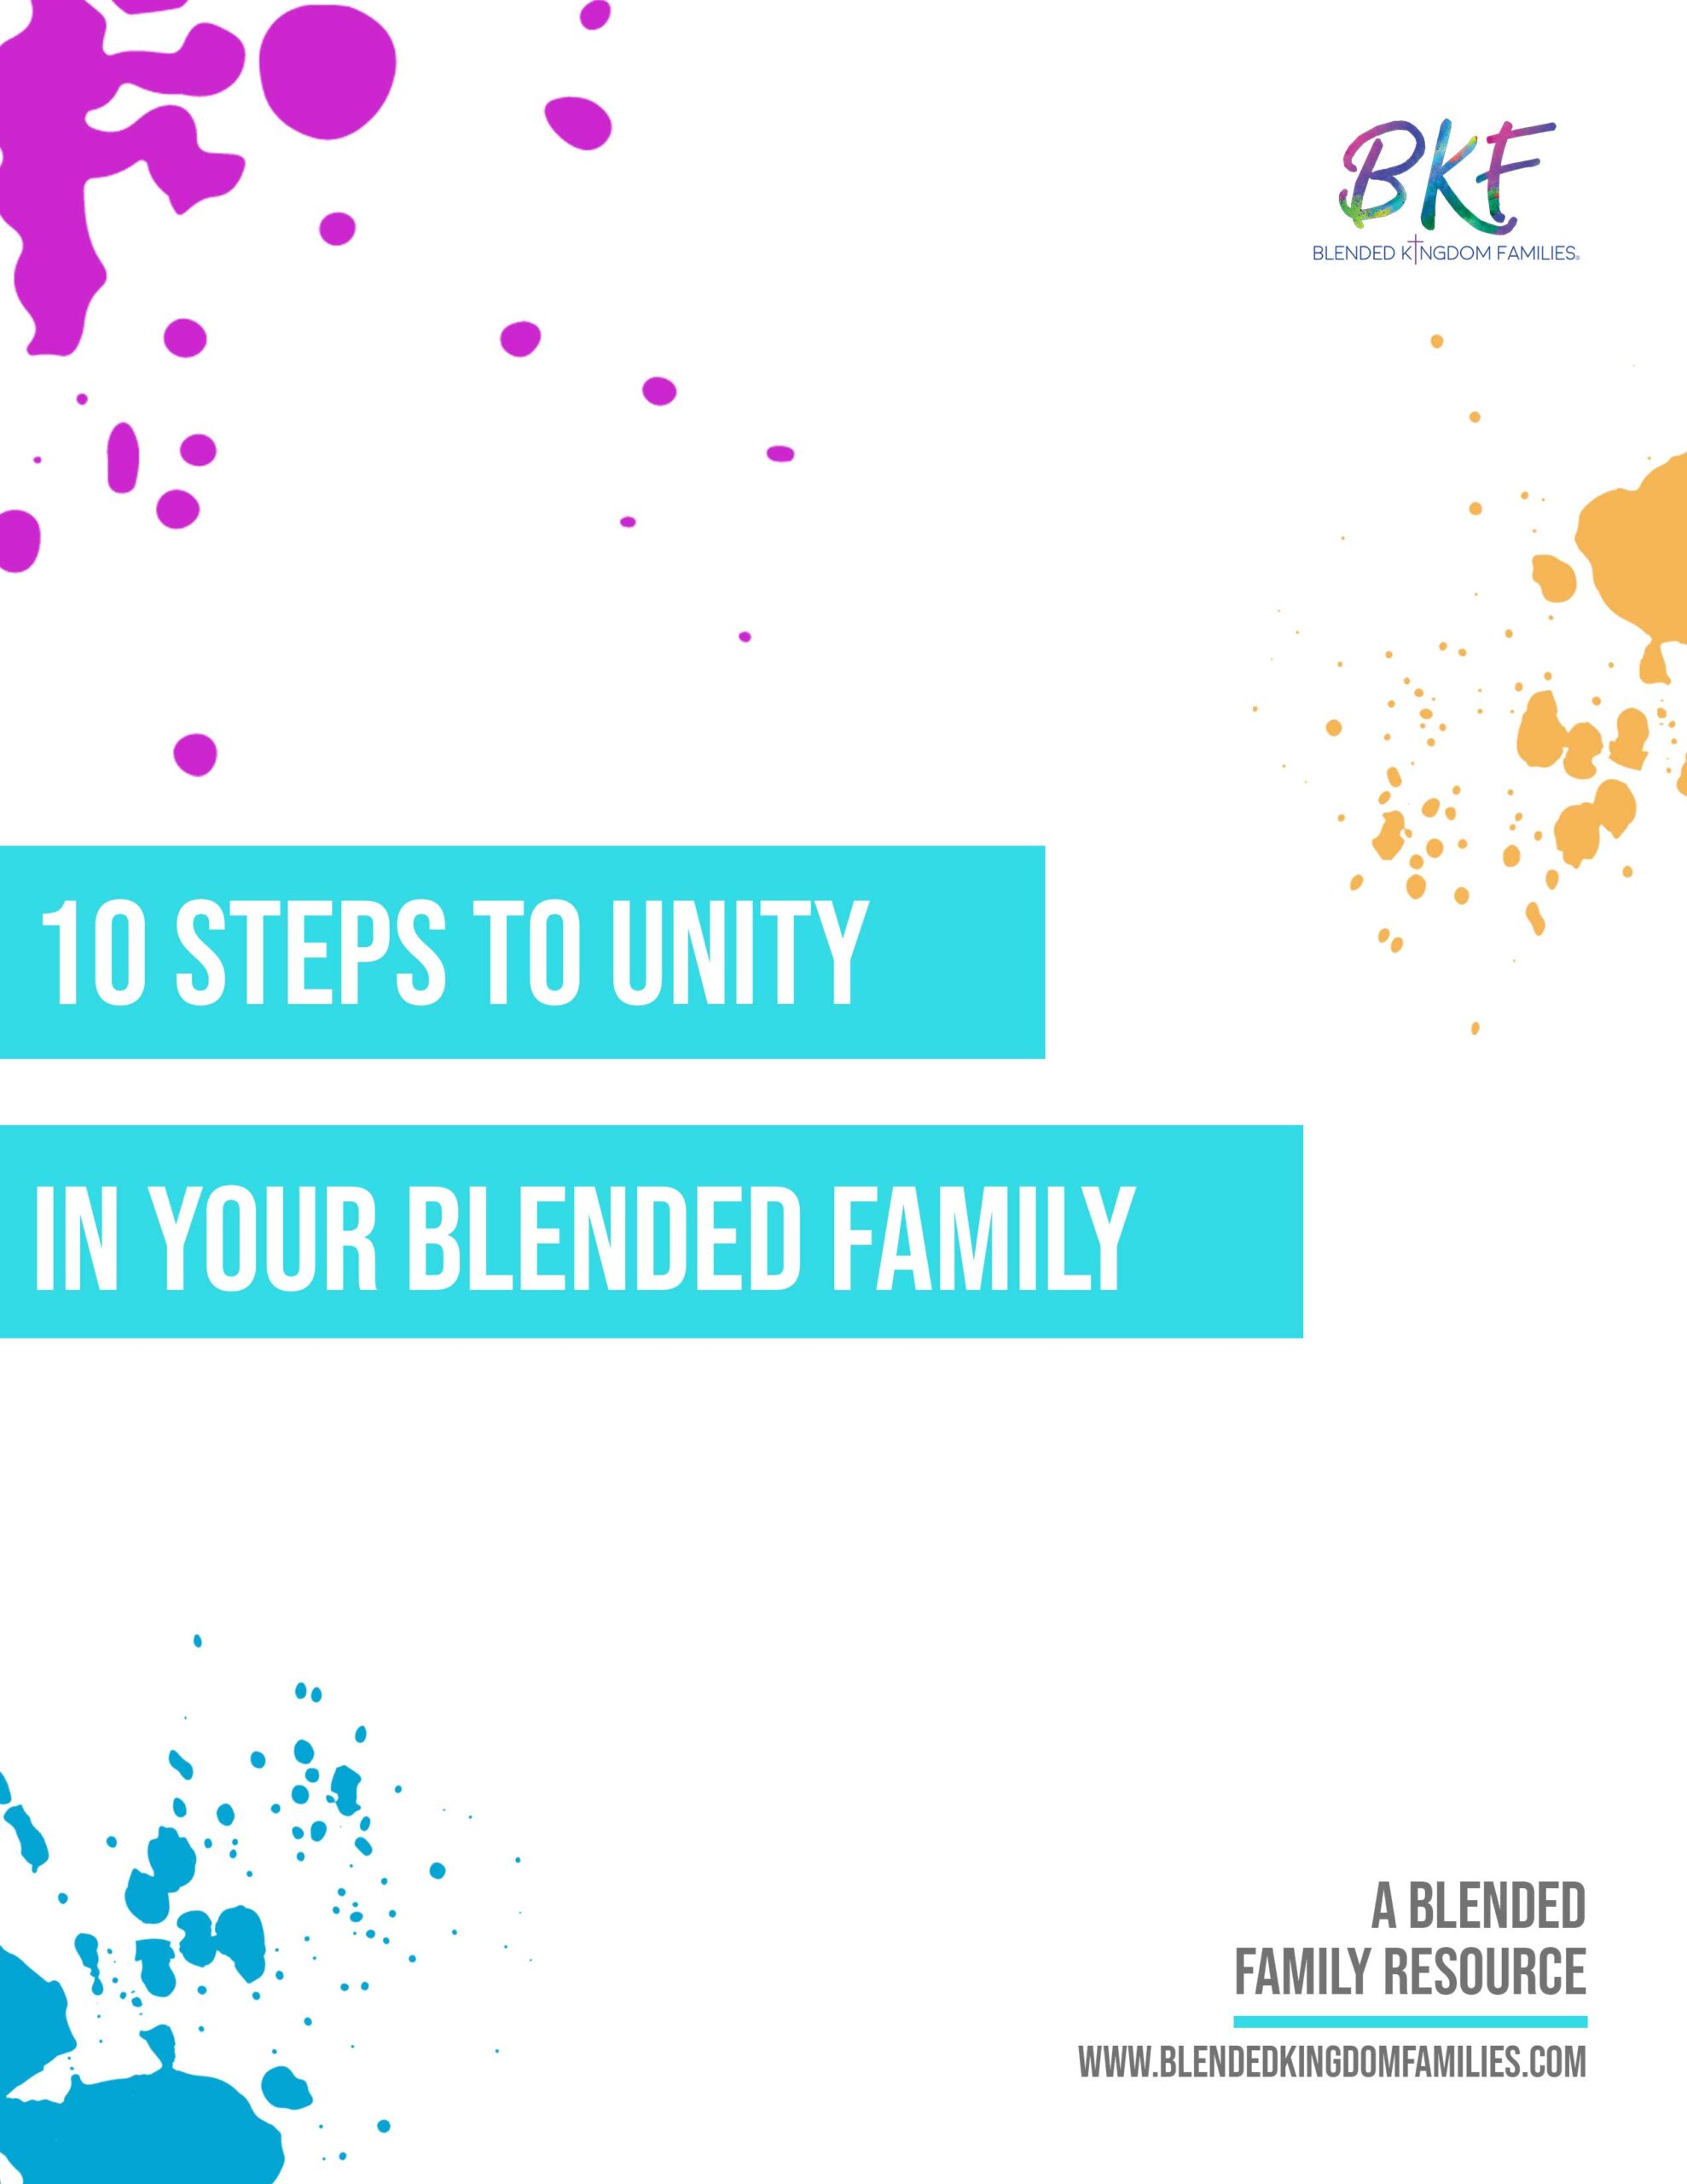 10 Steps to unity in your blended family 